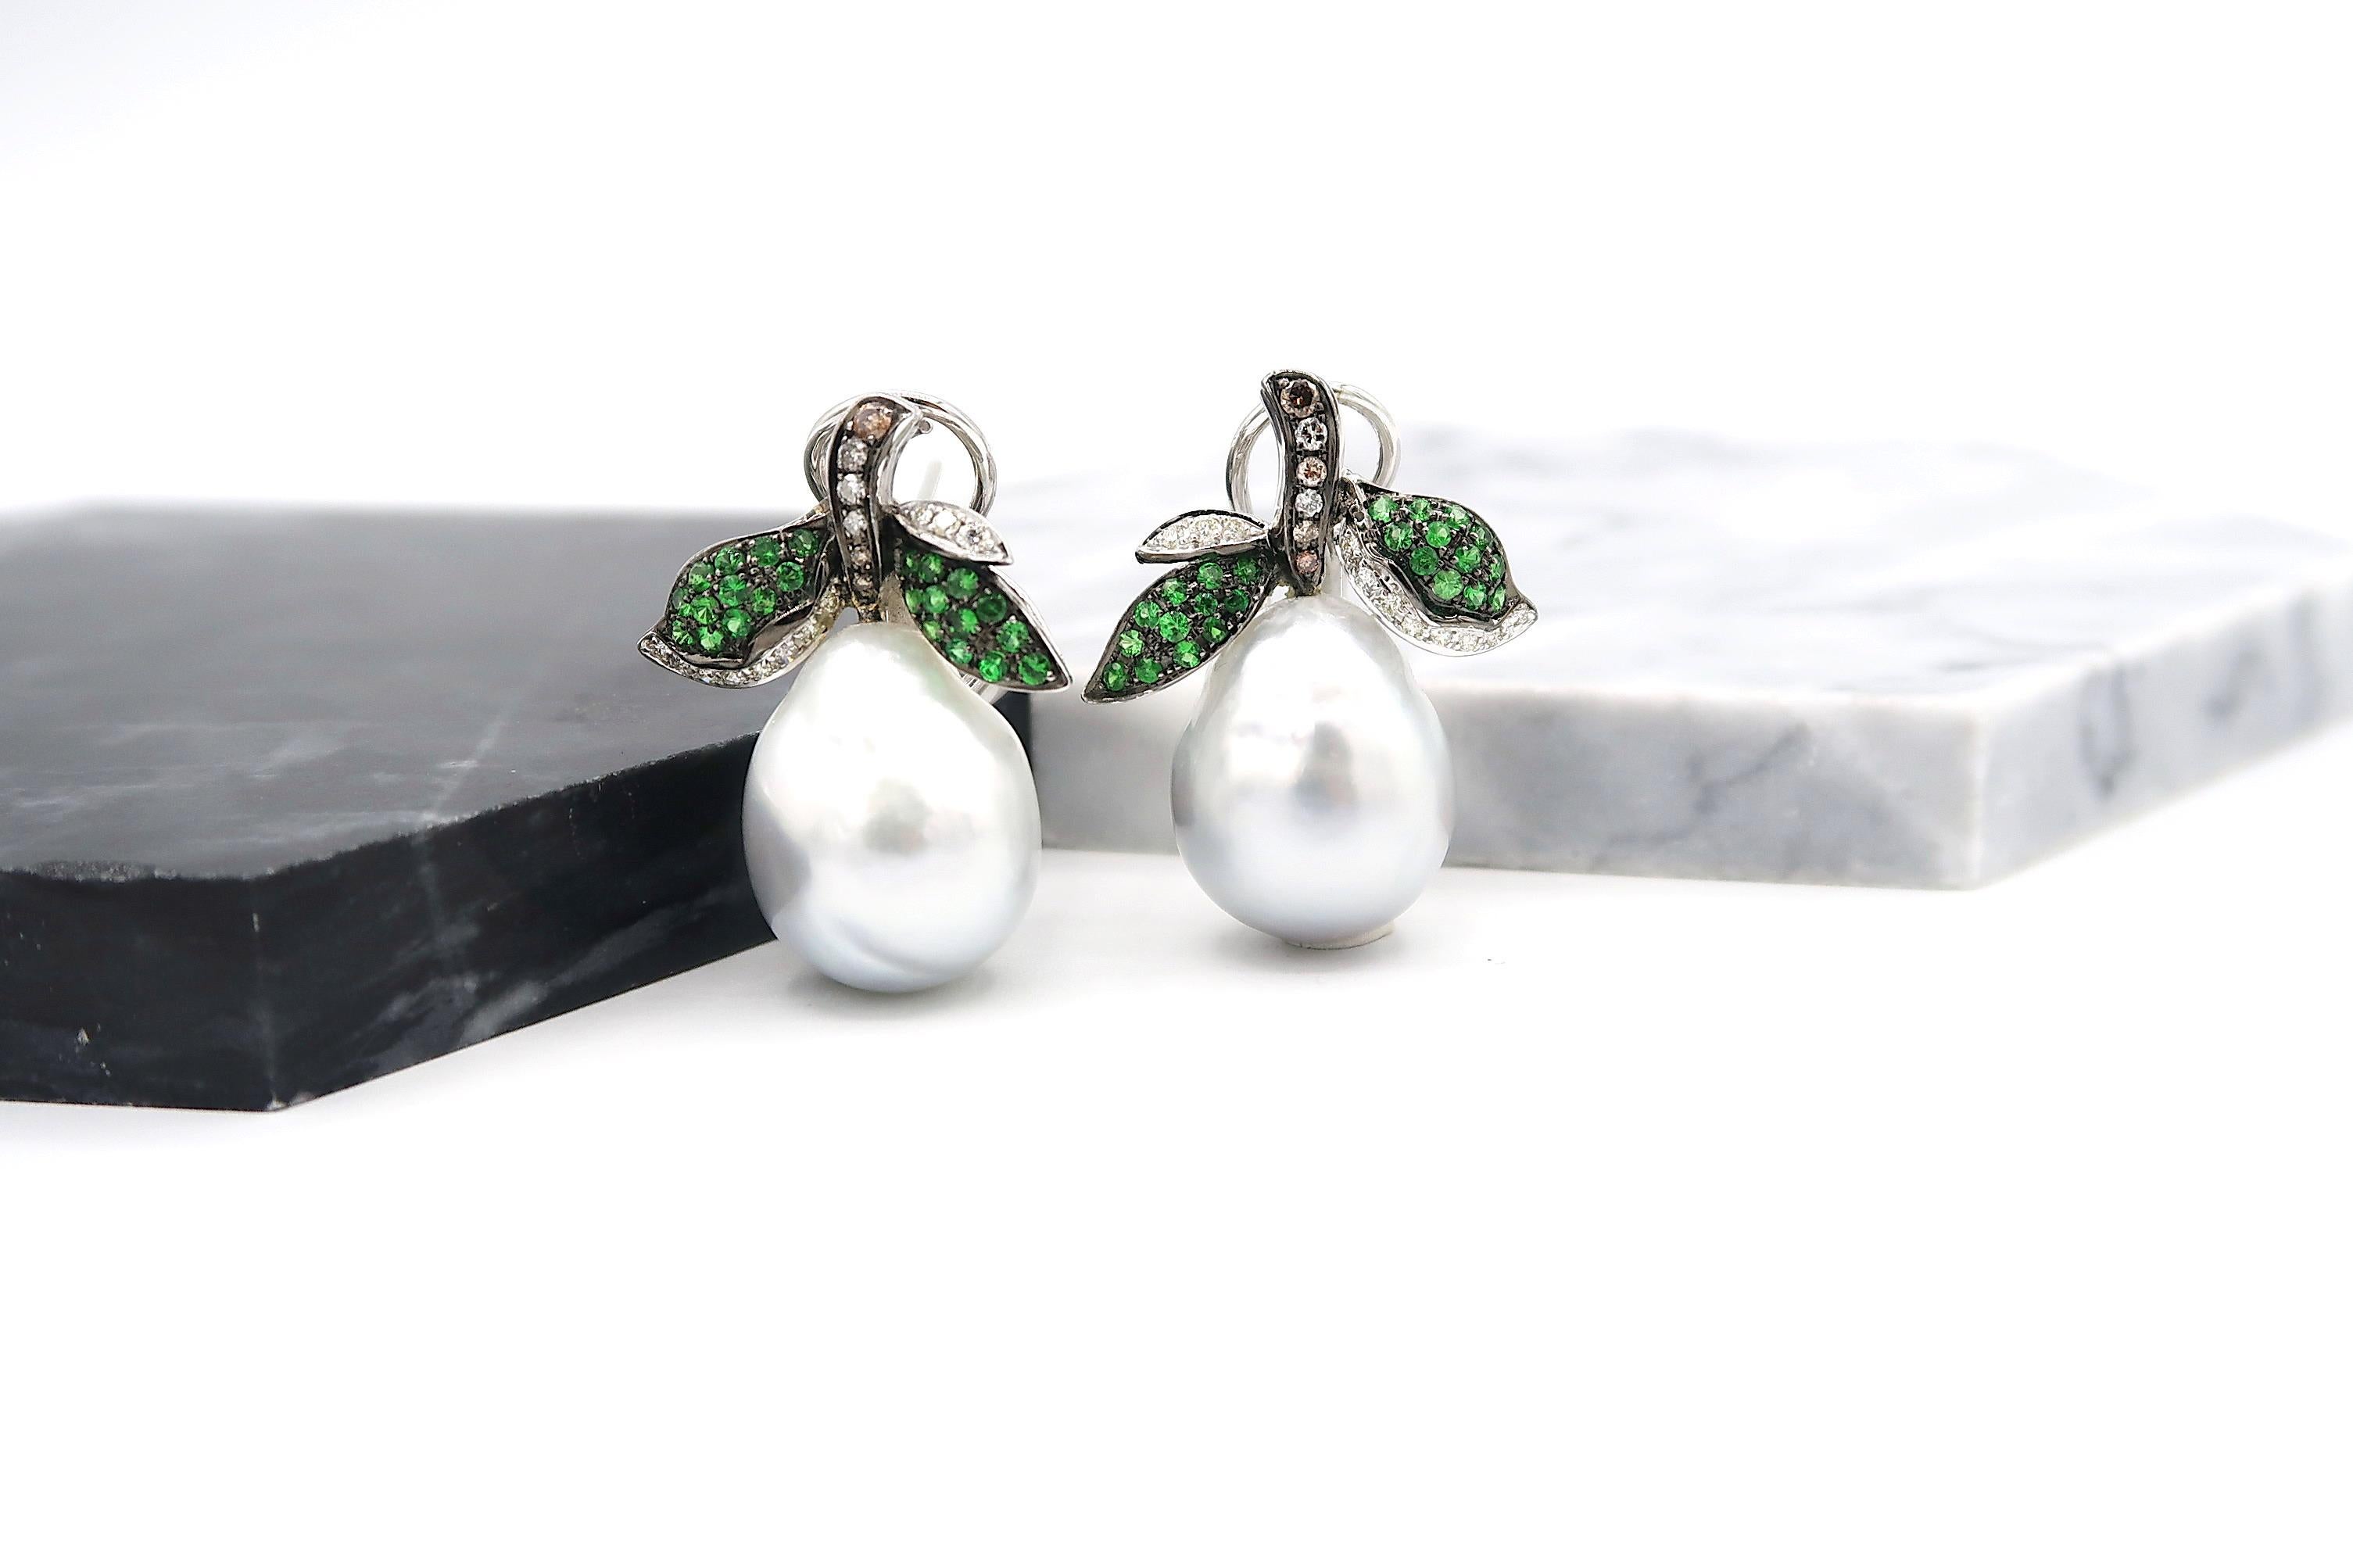 Pear Clip On Earrings for Pierced Ears made of Baroque South Sea Pearls, Tsavorite, Champagne and White Diamond, and 18 Karat Gold

Gold: 18K 10.20g.
Diamond: 0.18ct.
Champagne Diamond: 0.18ct.
Tsavorite: 0.86ct.
Baroque South Sea Pearls: 2 pcs.
